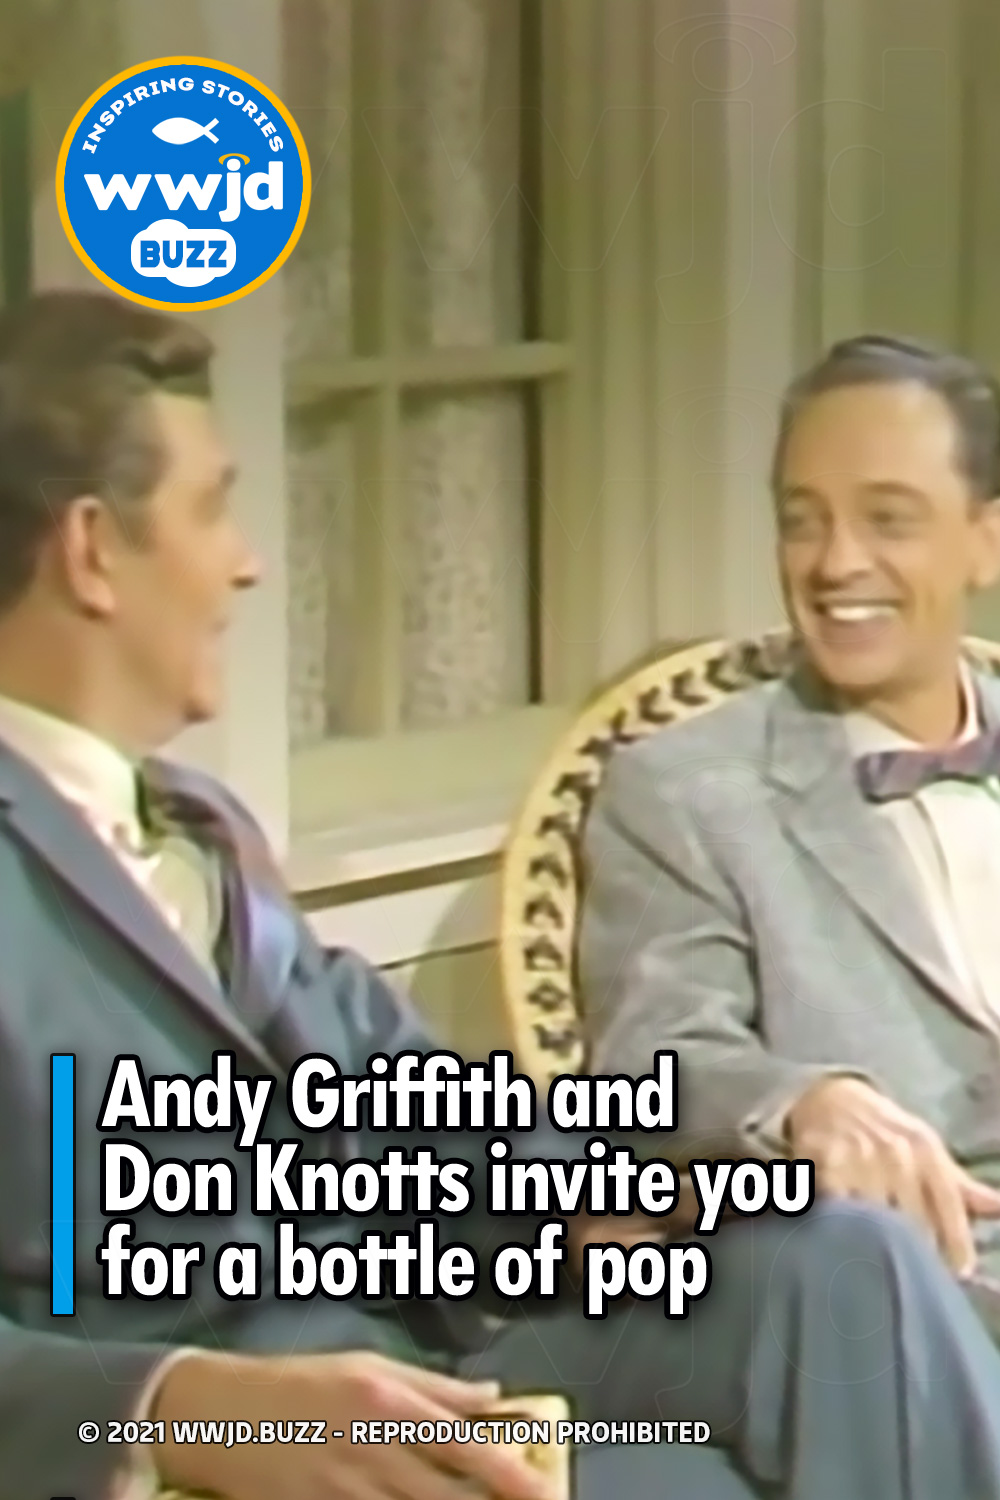 Andy Griffith and Don Knotts invite you for a bottle of pop